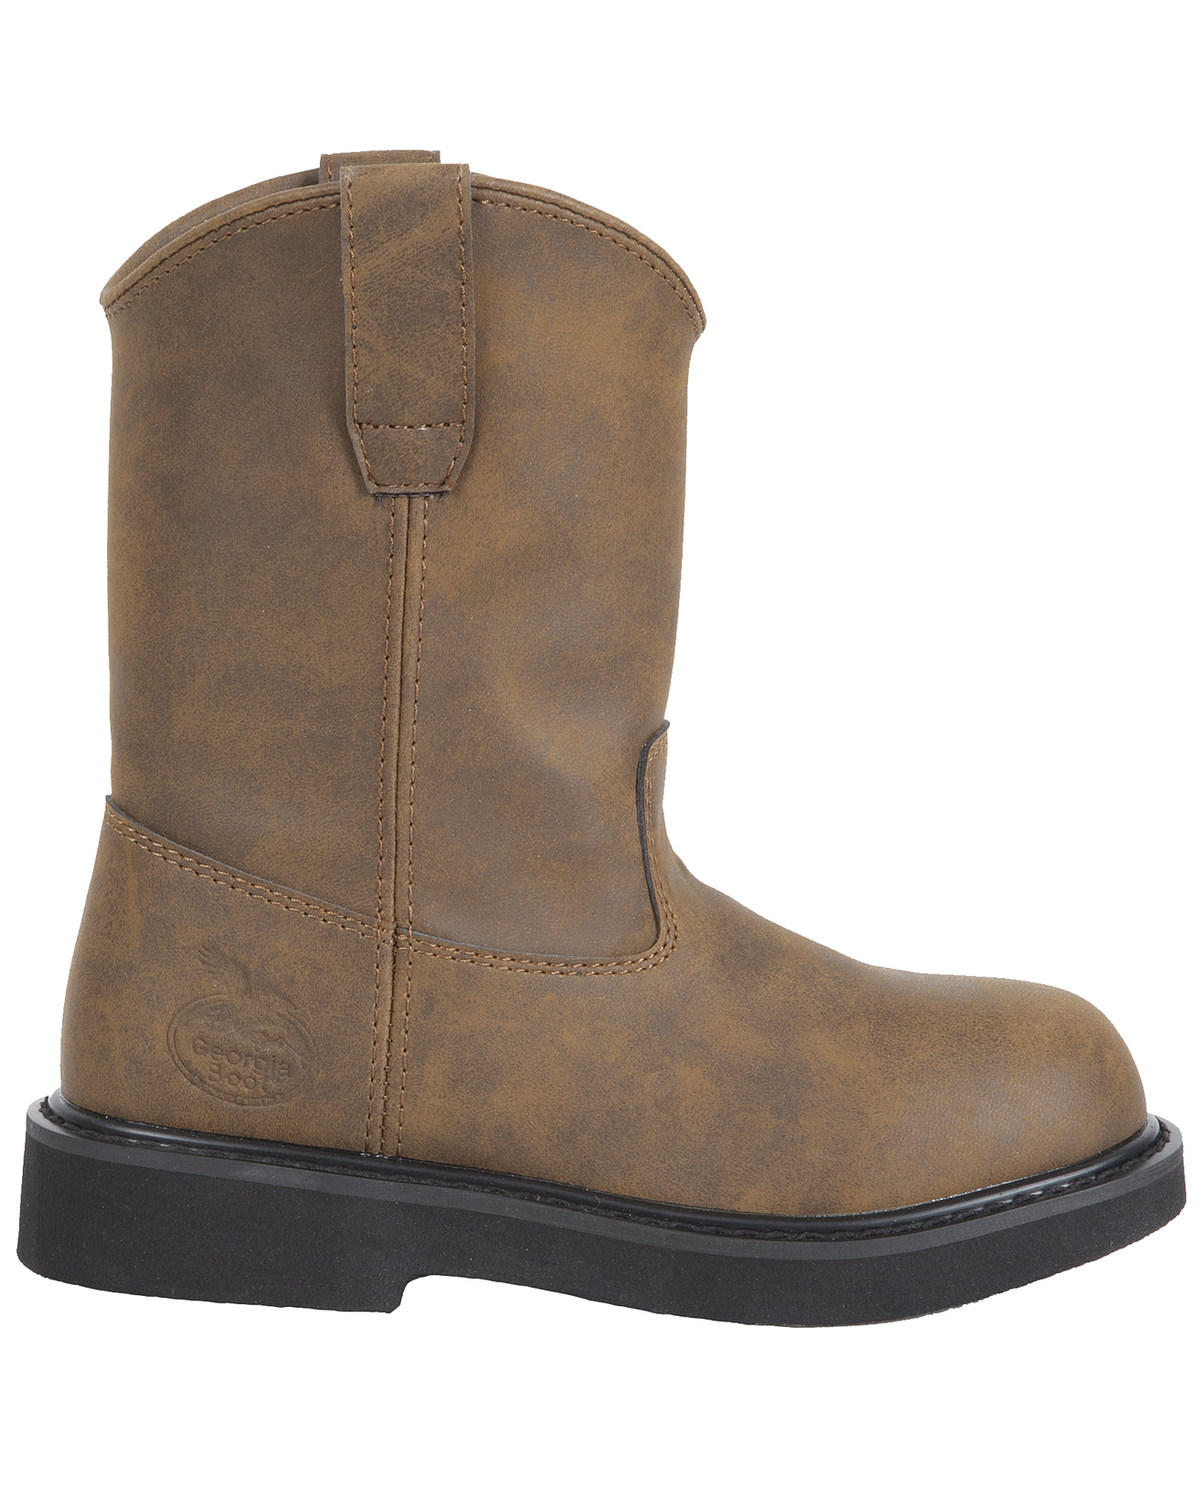 Georgia Boot Boys' Pull On Work Boots - Round Toe